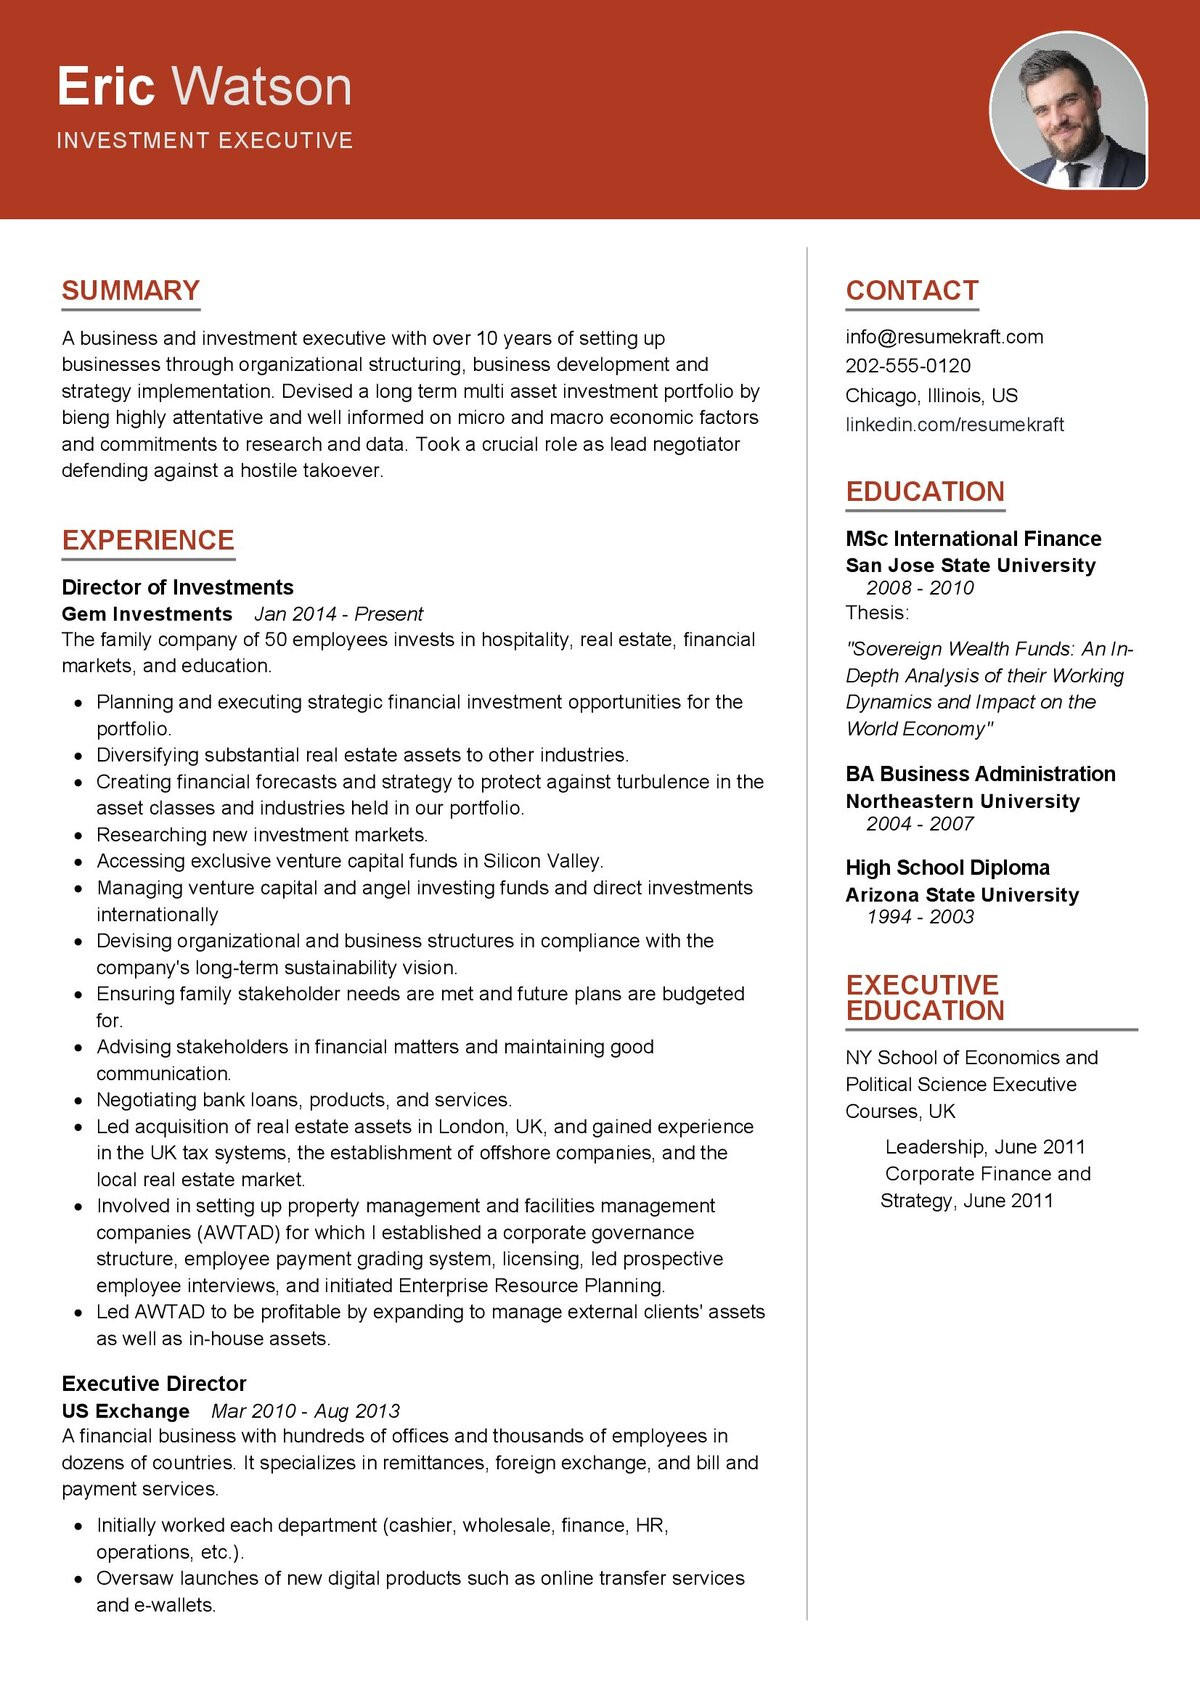 Resume Samples for Hedge Fund Operations Investment Executive Resume Sample 2022 Writing Tips – Resumekraft